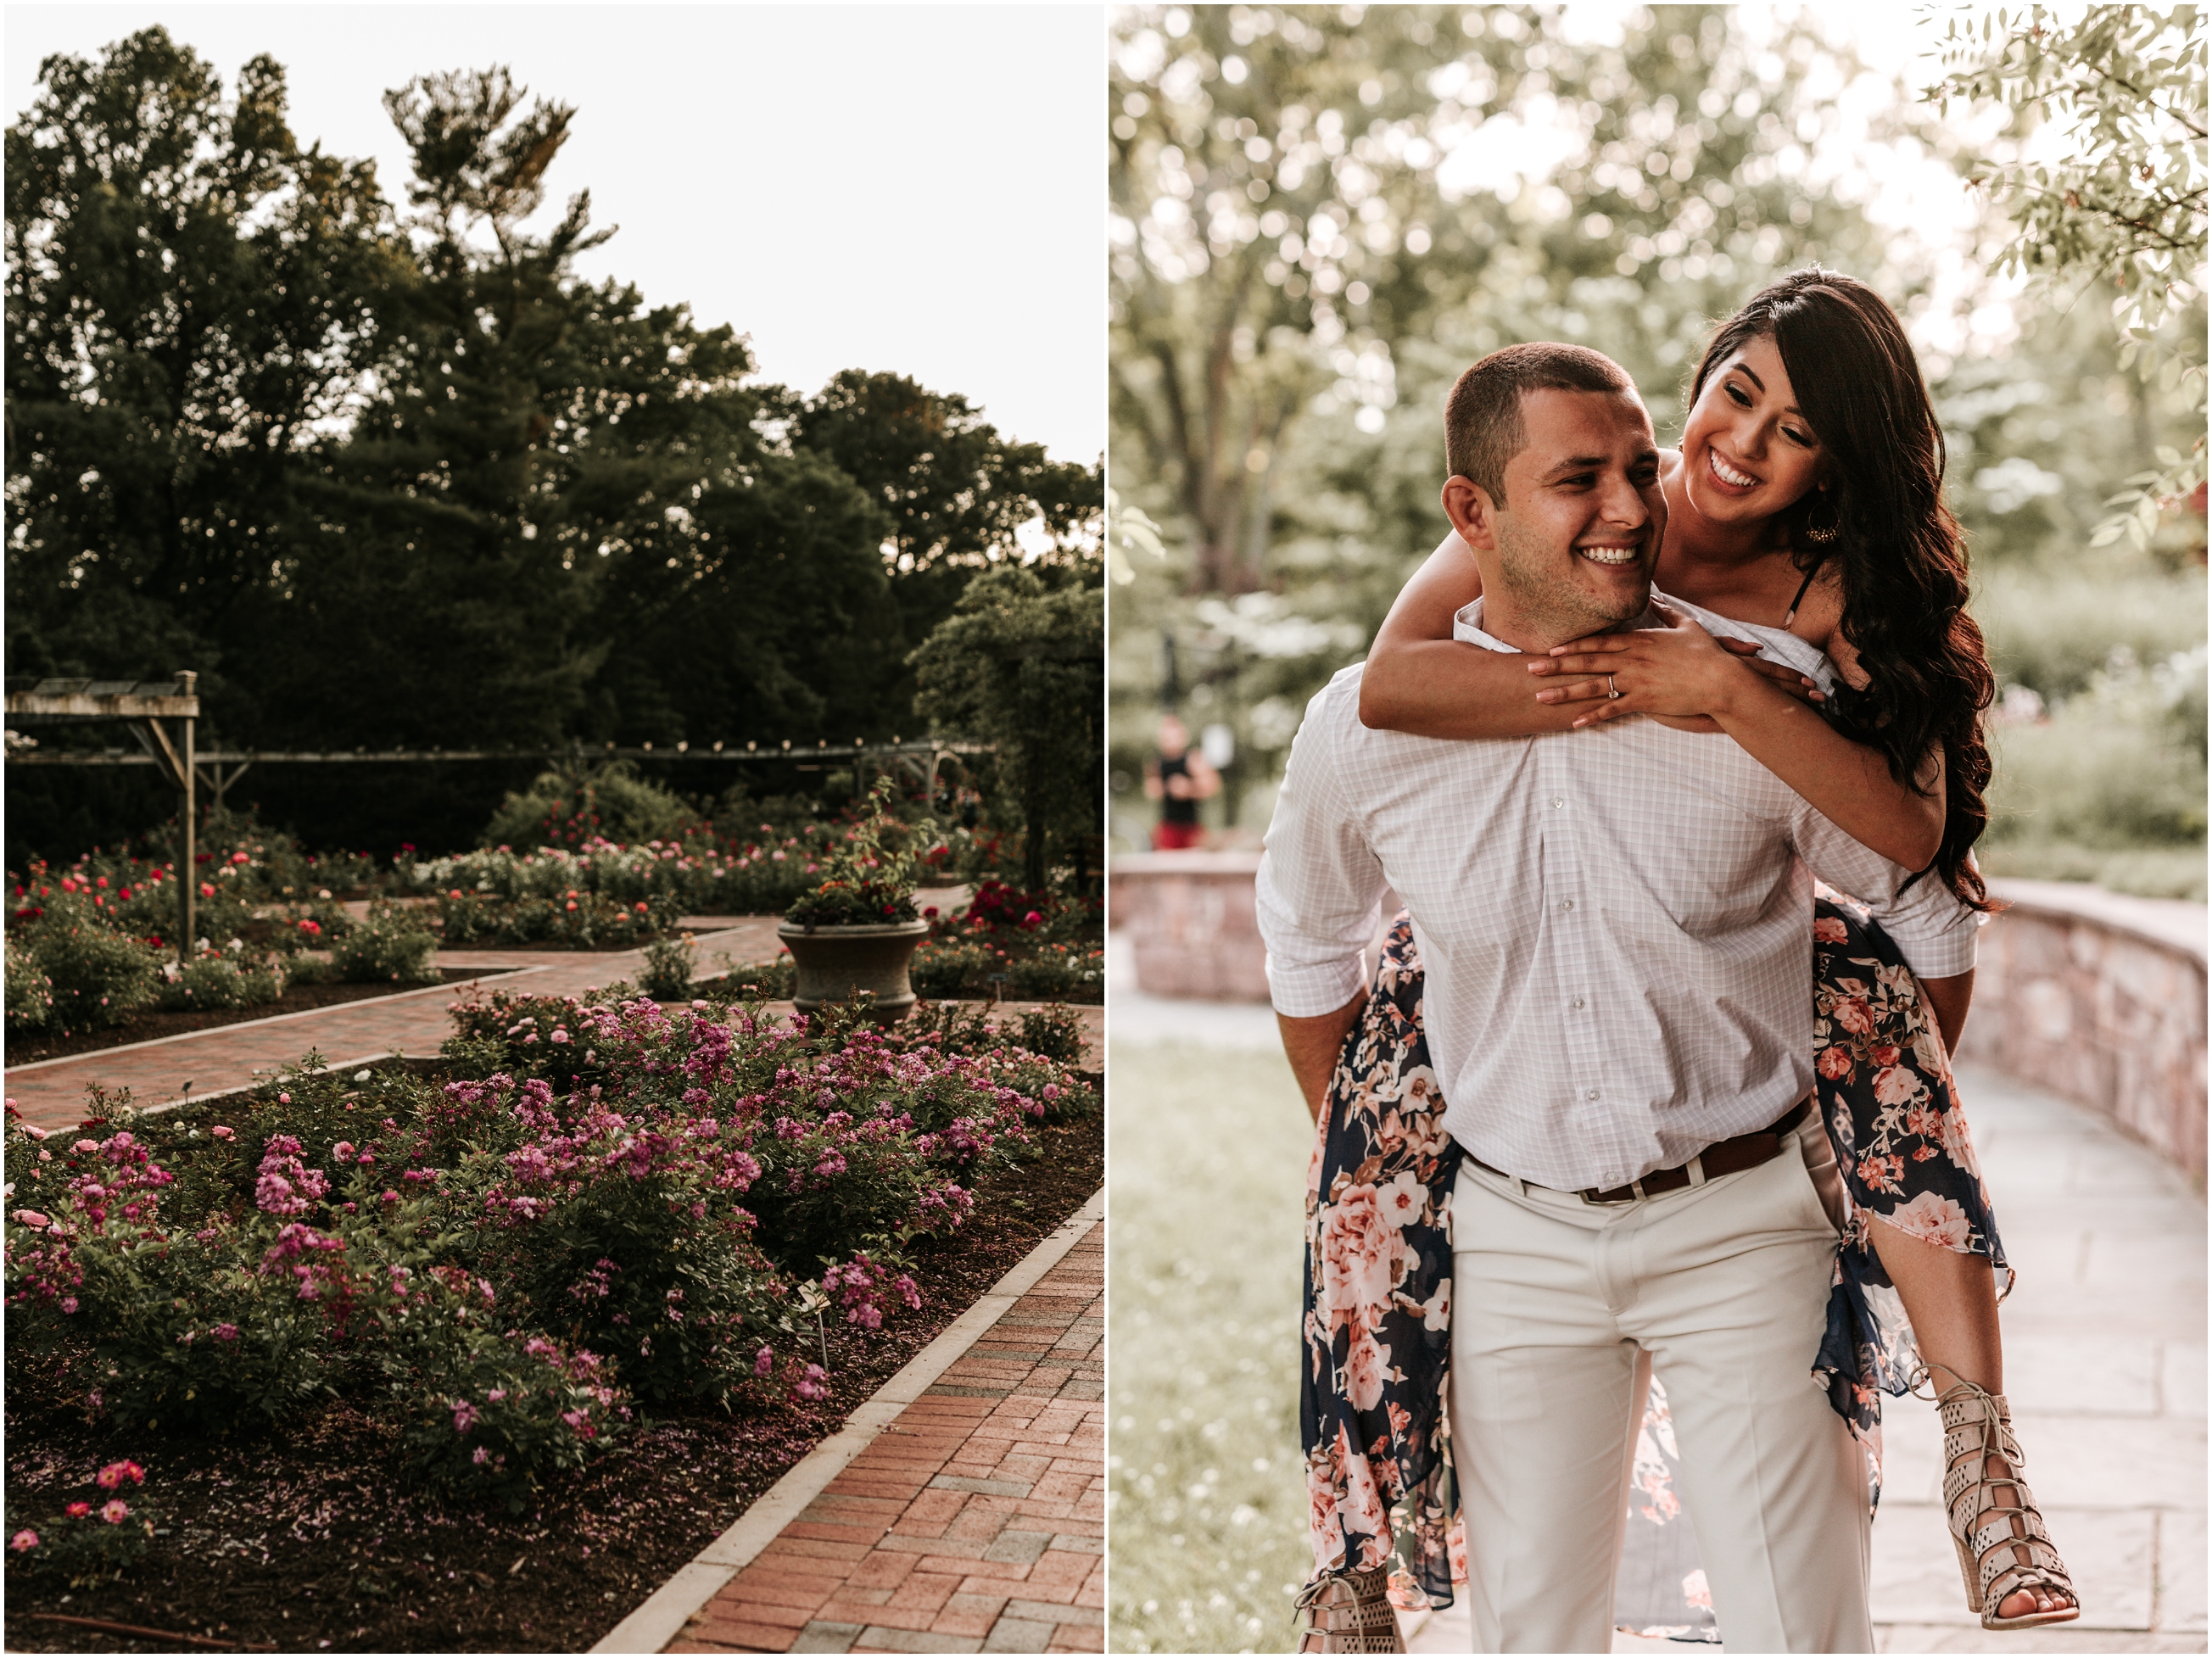 Tatiana and Ronald’s Colonial Park Engagement Session was all sorts of perfect from the blooming rose garden to their adorable pups, & ! Look at those mushy faces!!! They were SO excited for their modeling gig; we had to bribe them with snacks to keep there attention on the camera, but hey, they’re pretty cute so we will cut them some slack for looking all over the place. :) Tati and Ronald were up for anything, and kept me laughing the entire shoot! We found the cutest little cottage house that I just couldn’t get enough of before we headed over into the rose garden. It was such a beautiful pathway full of different kinds of roses all labeled with unique names (one kind was named Dolly Partons, haha!) These high school sweethearts met during the last few days of Tati’s sophomore year and Ronald’s freshman year. They lived in different towns, so they had never met before until the day that Tati was at her locker with a friend and noticed him walking by. She thought he was very good looking, so she asked her friend what she knew about him and that was it. She, unexpectedly, got a friend request from him on Facebook (She later ended up finding out he had been asking his friends who she was, too)! They became friends, and although school ended in June, they just kept on messaging on Facebook. They ended up dating for a whole 3 weeks when school started back in Semptember, but they broke up soon after. Life happened for nine months and there was no communication between them until out of the blue, they ended up attending the same church! From there, their love story officially began. They have been together for almost 6 years now, and Tati says, “We have grown up together from immature 15 year olds to adults.There have been highs and lows, like any relationship, but thankfully, we have been able to fight through.”   When I asked about how Ronald proposed, Tati told me, “So Ronald proposed on August 12th 2017. It was a complete surprise for me. On that day, I was told by my parents that we had a family dinner to go to, which they had to beg me to go to. I got ready even though all I wanted to do was stay at home and watch movies. On our way to the “family dinner,” my dad stopped at my pastor’s house. We went inside and to the backyard where all my friends and family were. There was a big screen with petals all on the grass. When I entered the backyard, I knew what was happening. A video started playing and it was Ronald speaking about our relationship. In the video, he had most of the gifts I had given him for our anniversary’s. When the video ended he asked me to marry him and I said YES, of course!” How adorable and romantic to be surrounded by all of their loved ones for such a special moment!! <3 Tatiana and Ronald, thank you both so much for sharing your story with me and for being so amazing to hang out with! I absolutely loved capturing this milestone in your lives, and I can’t wait for your big day next May!!! Xoxo